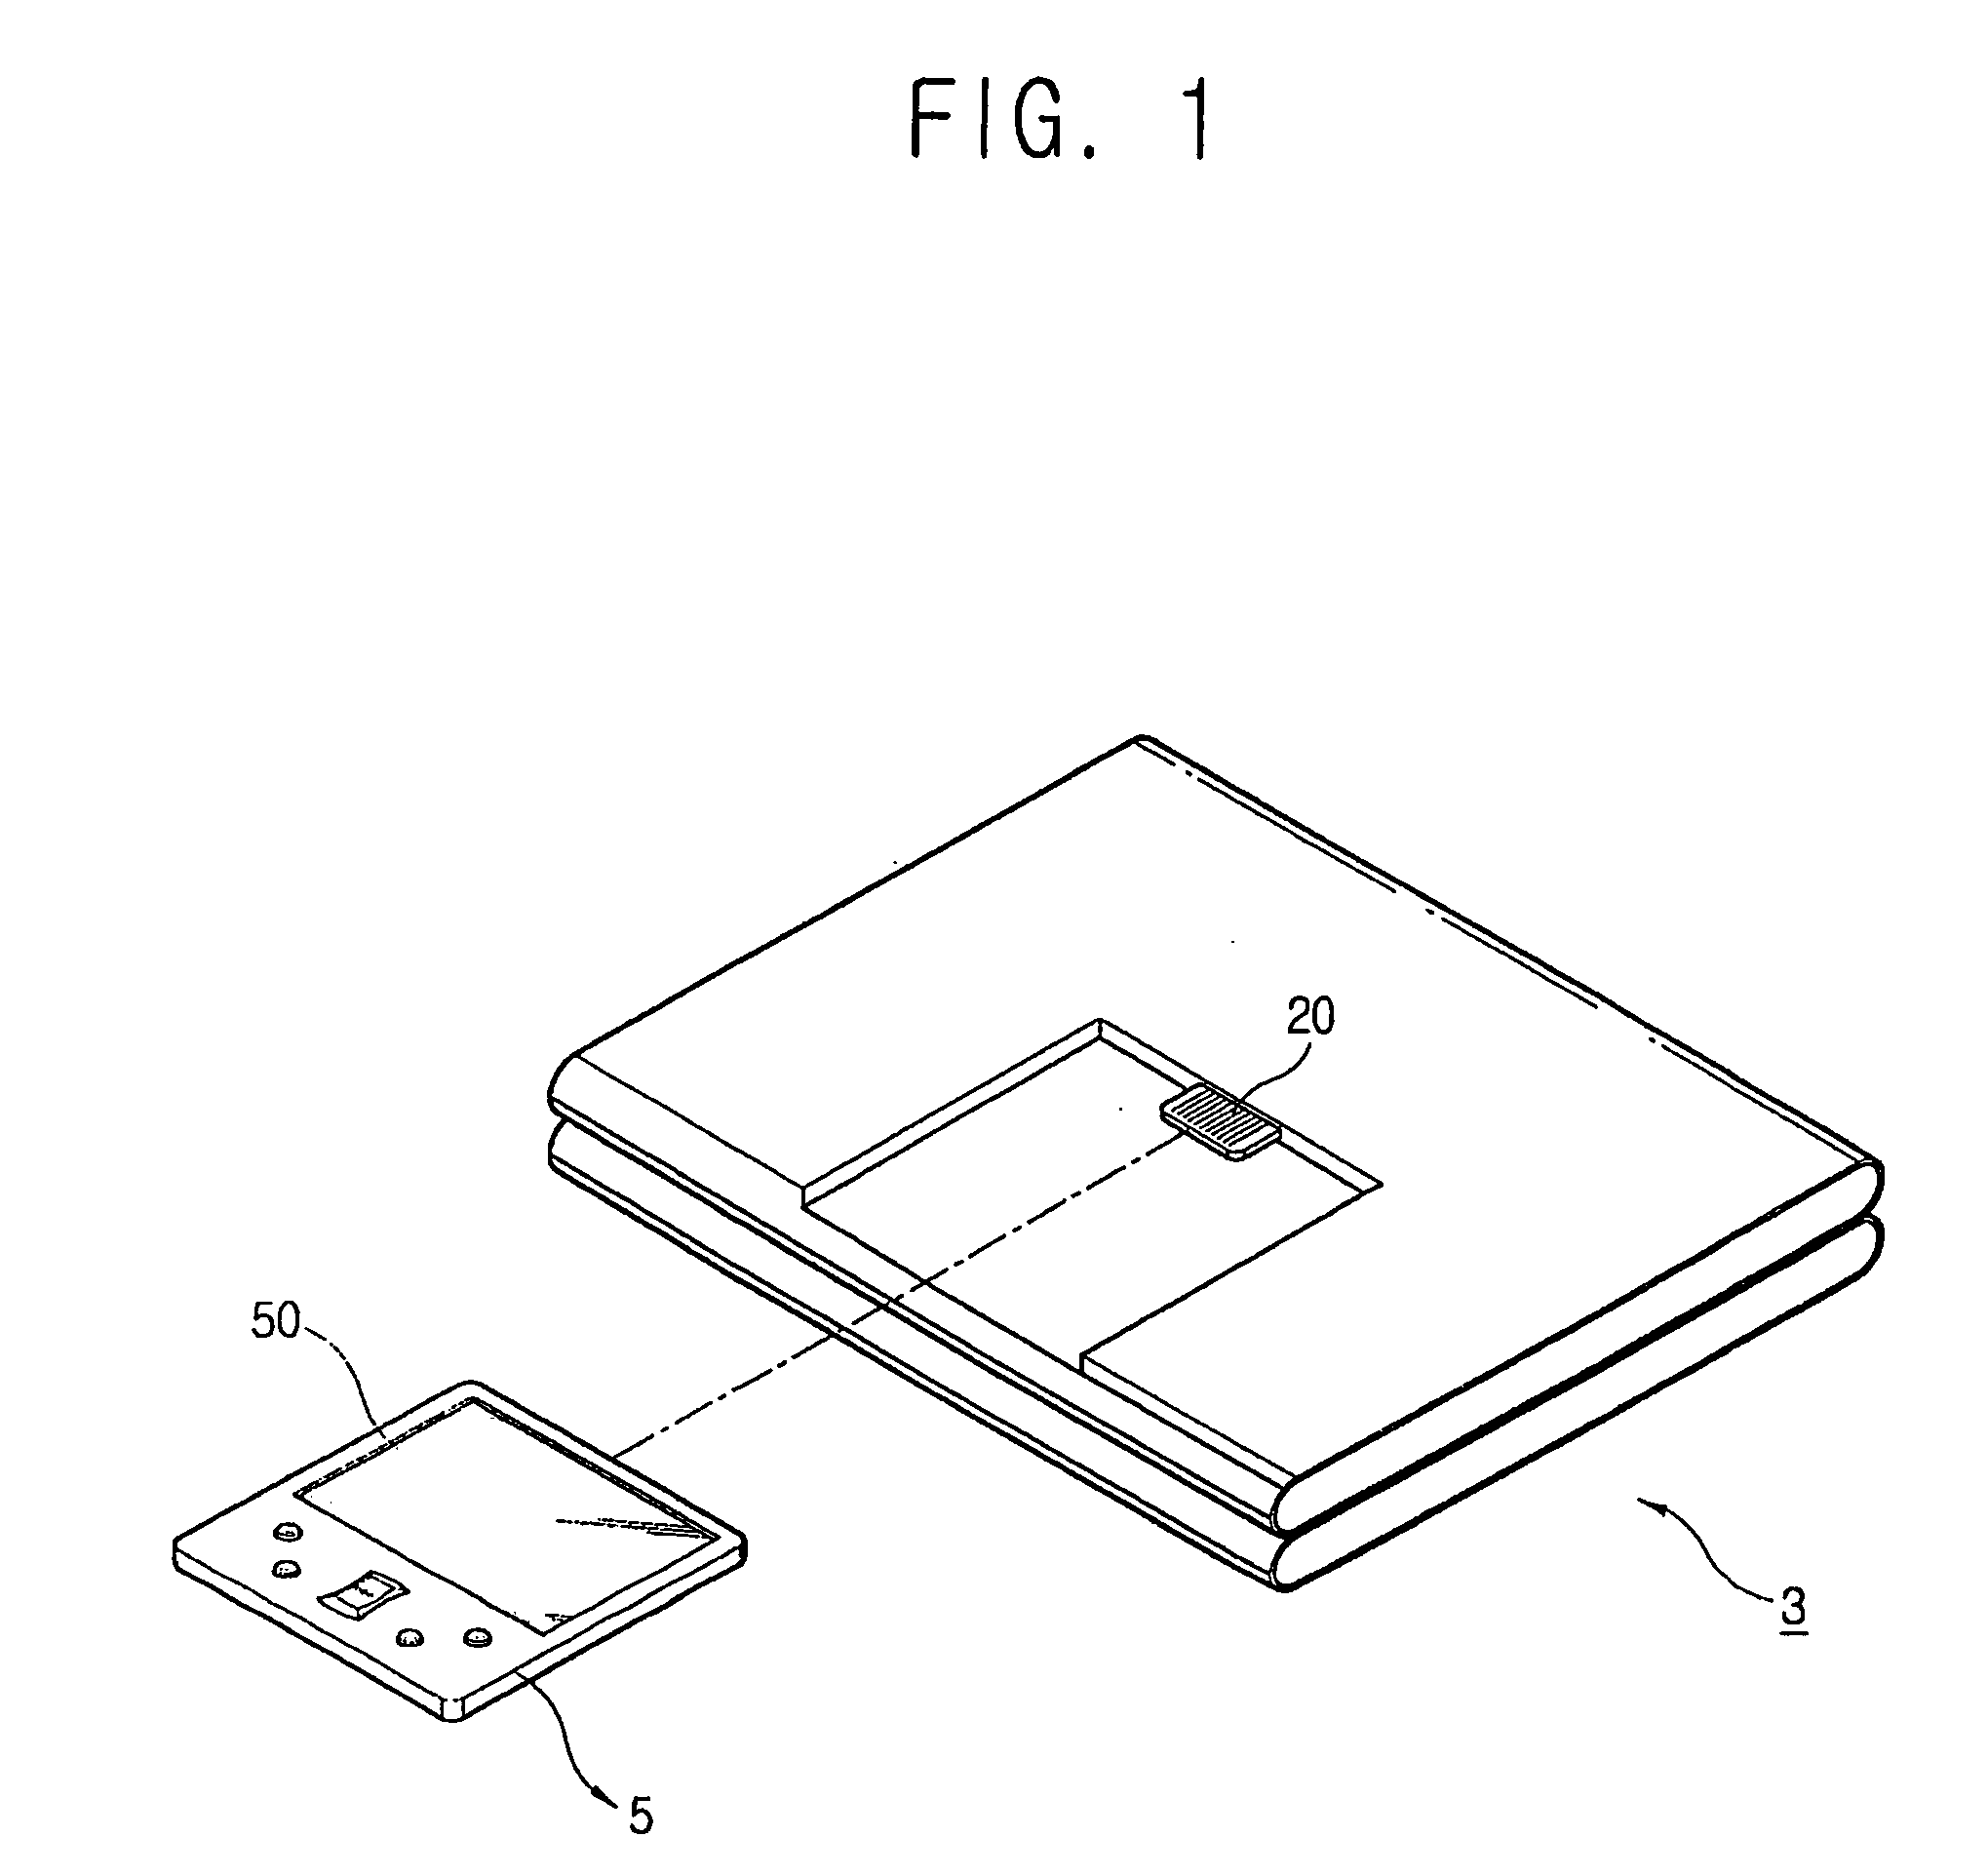 Method of controlling power to an auxiliary system comprising a display part and a wireless sending/receiving part connected to a portable computer through a mounting part